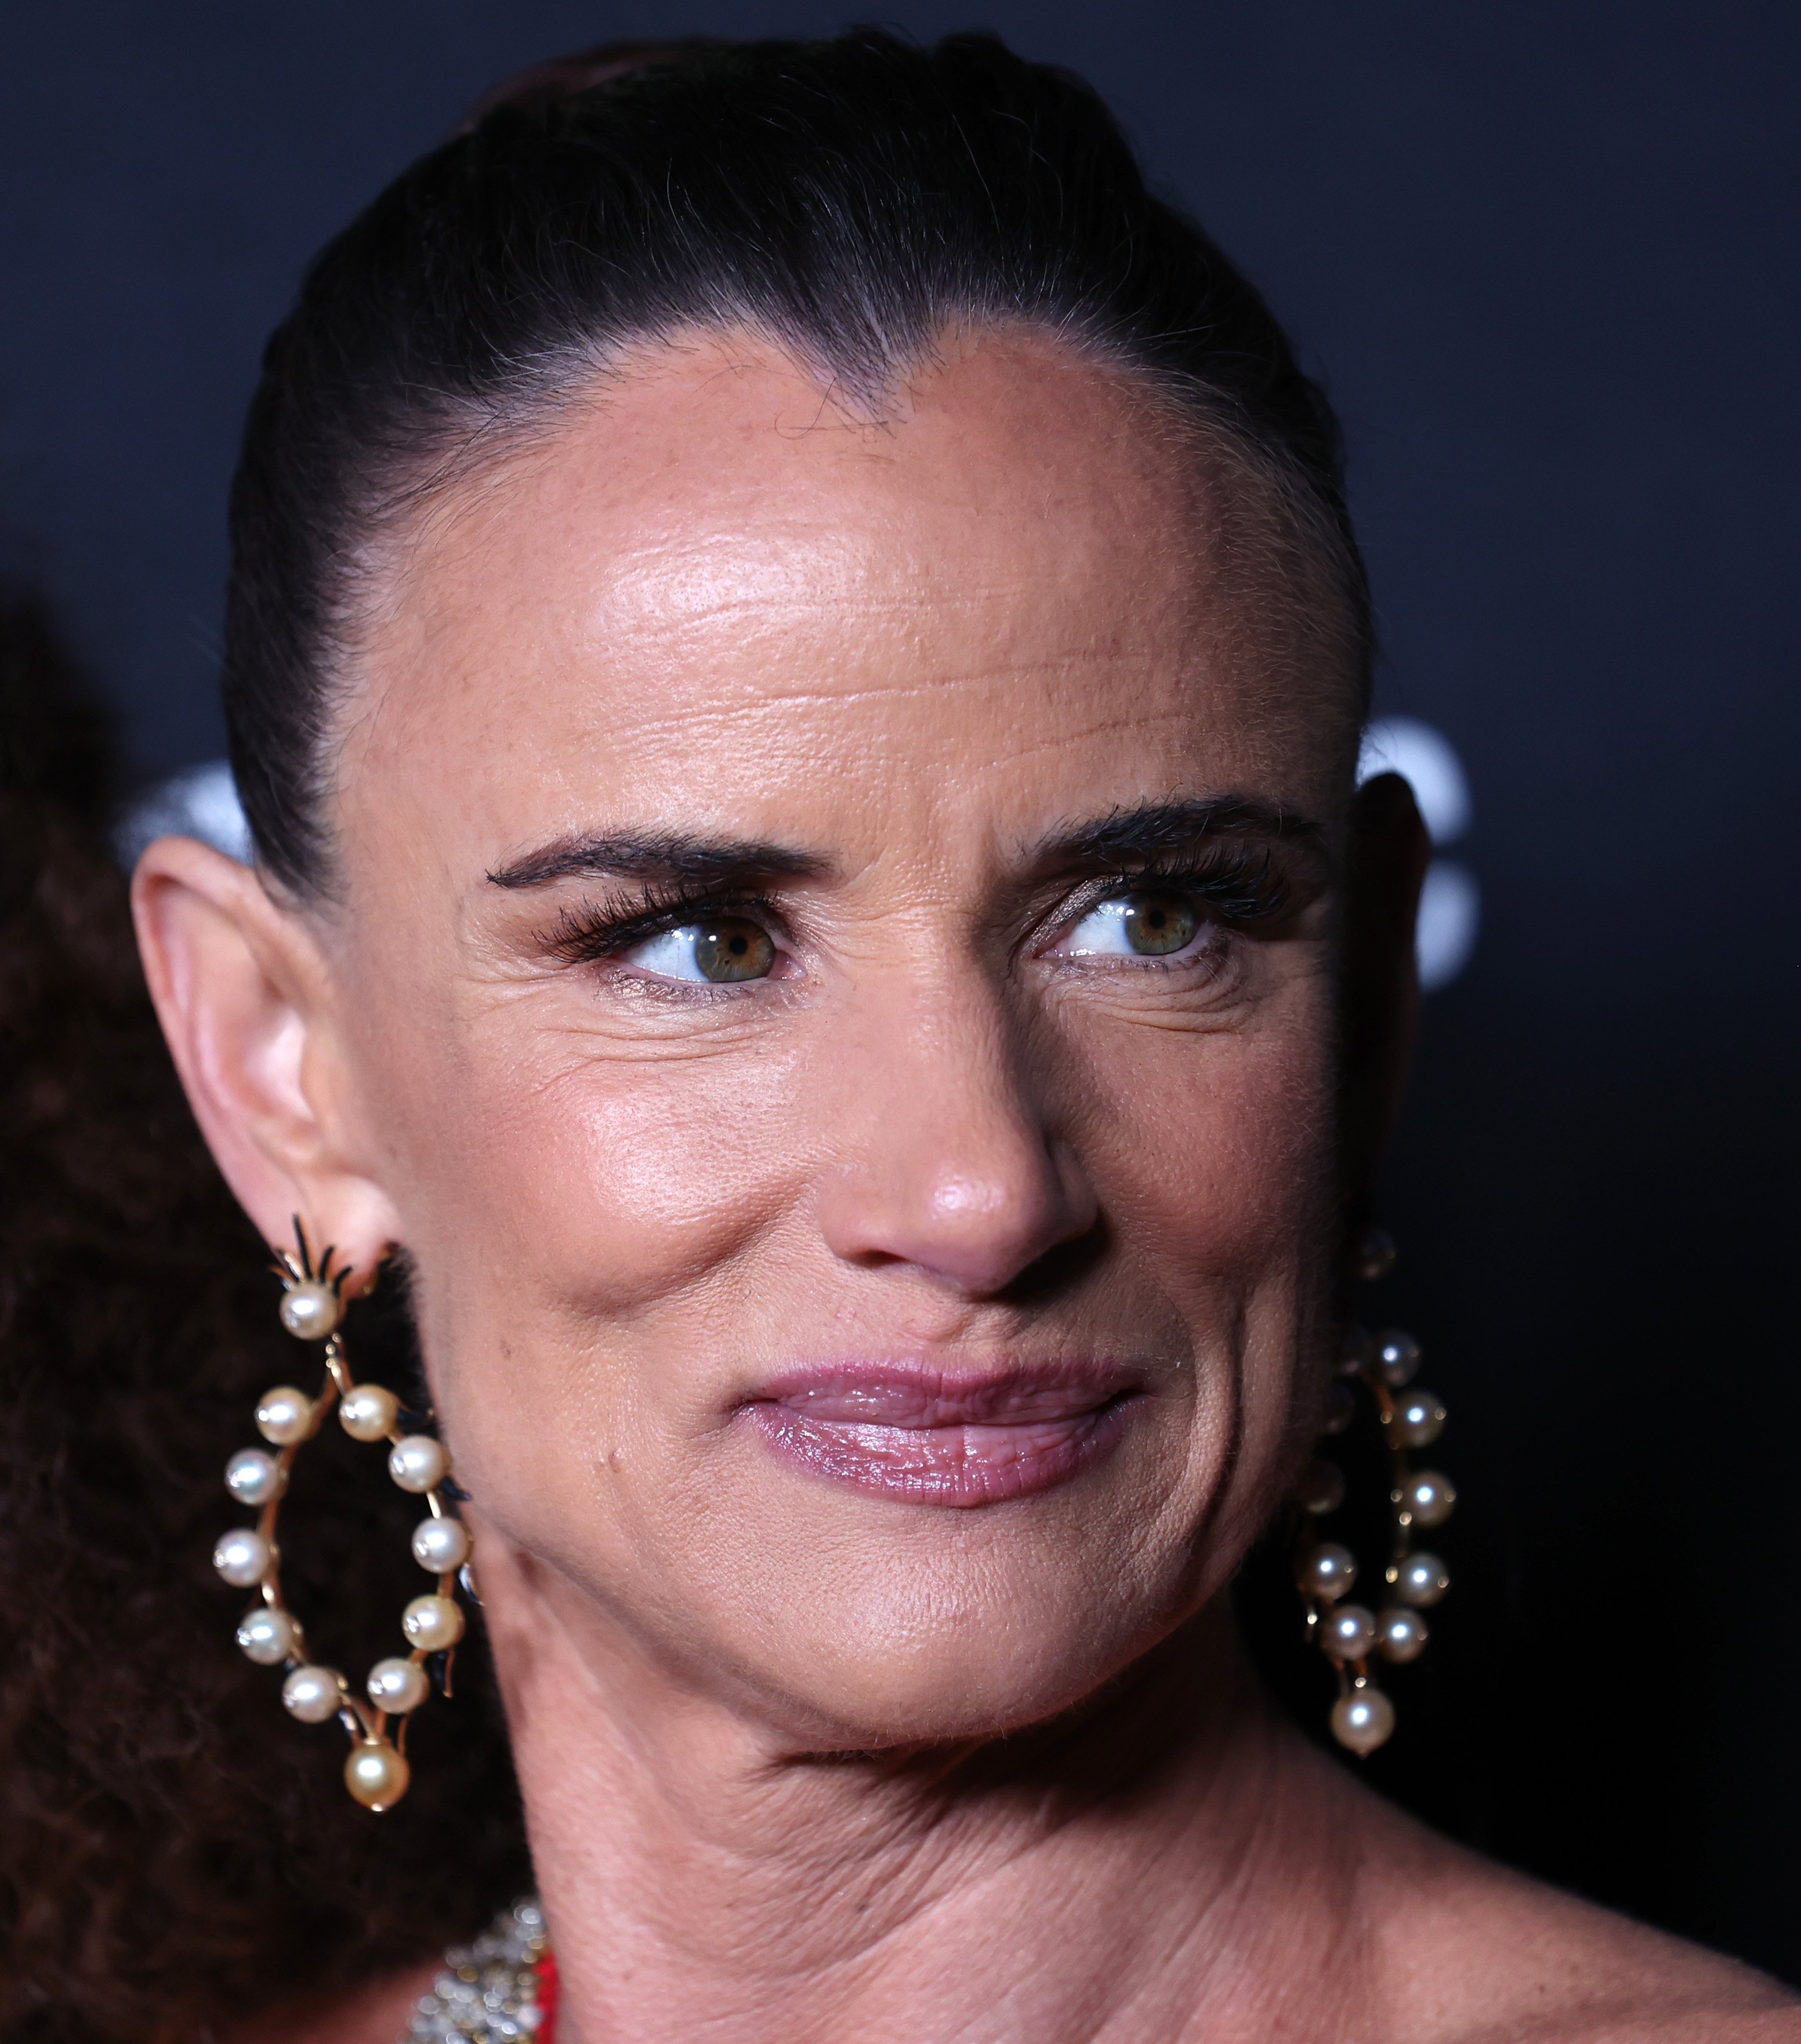 Juliette Lewis at Showtime’s “Yellowjacket” FYC event in California on 11 June, 2022 | Source: Getty Images 